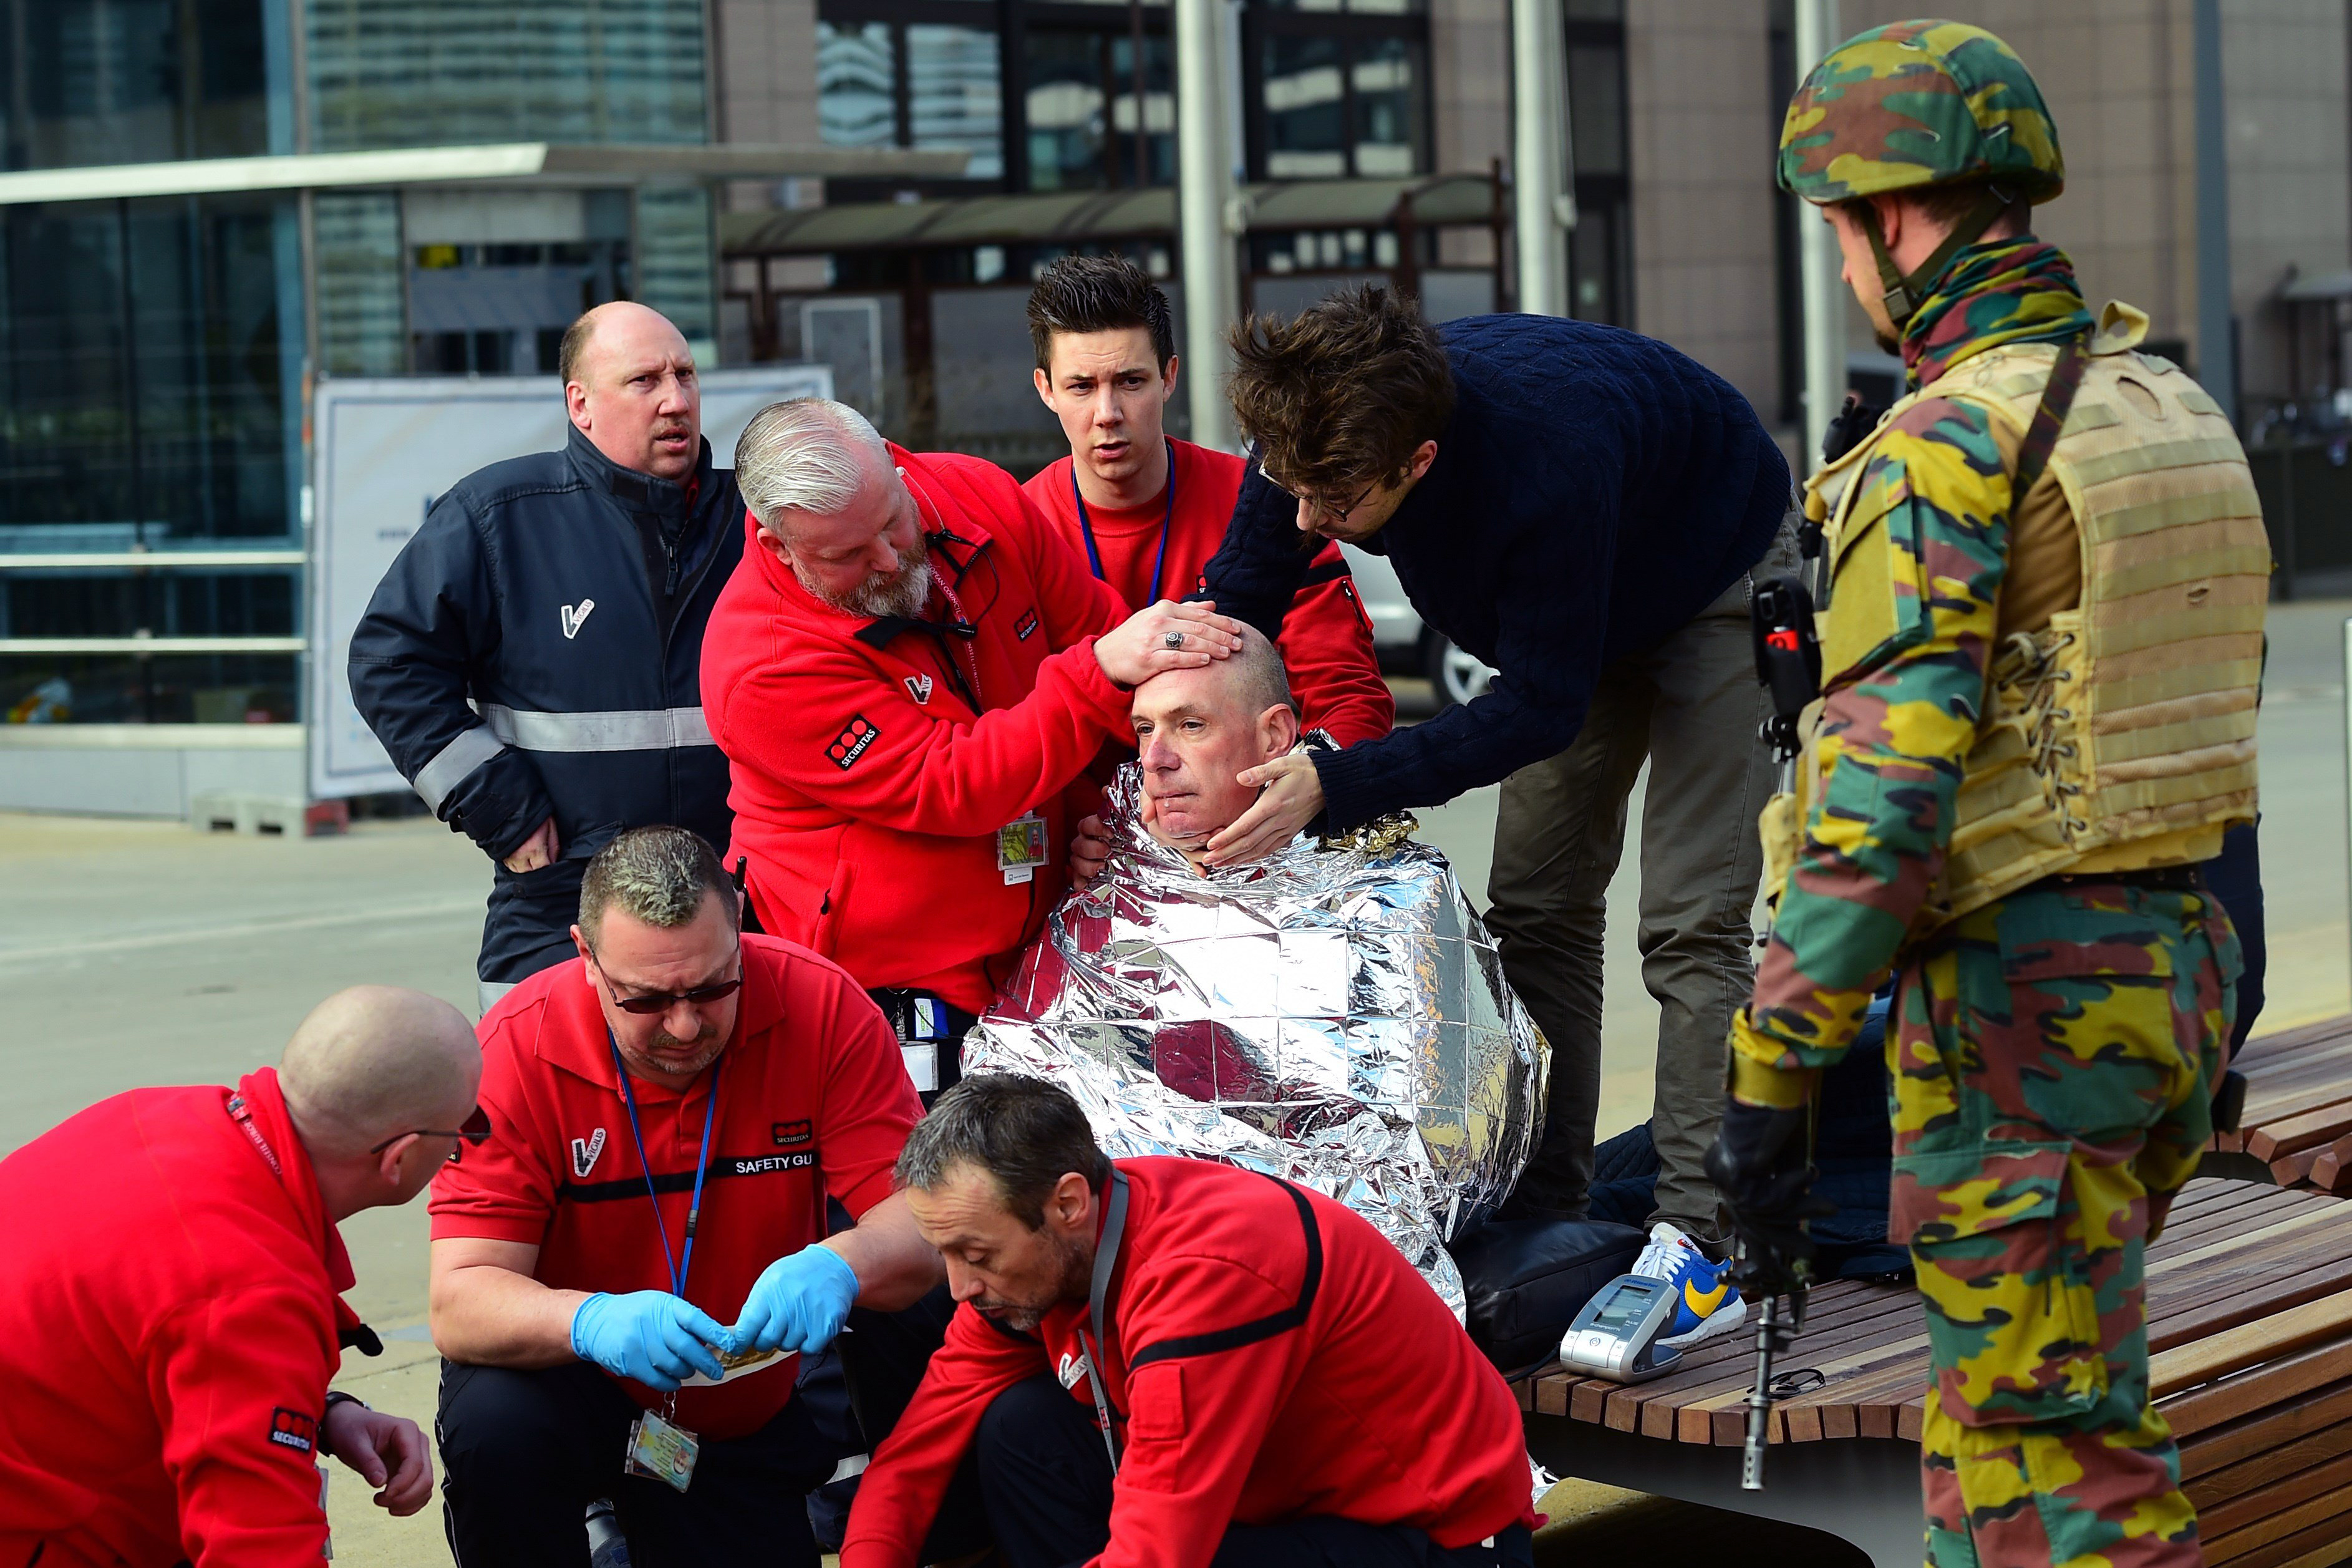 A victim receives first aid by rescuers, on March 22, 2016, near Maelbeek metro station in Brussels, after a blast at this station near the E.U. institutions caused deaths and injuries (Emmanuel Dunand—AFP/Getty Images)